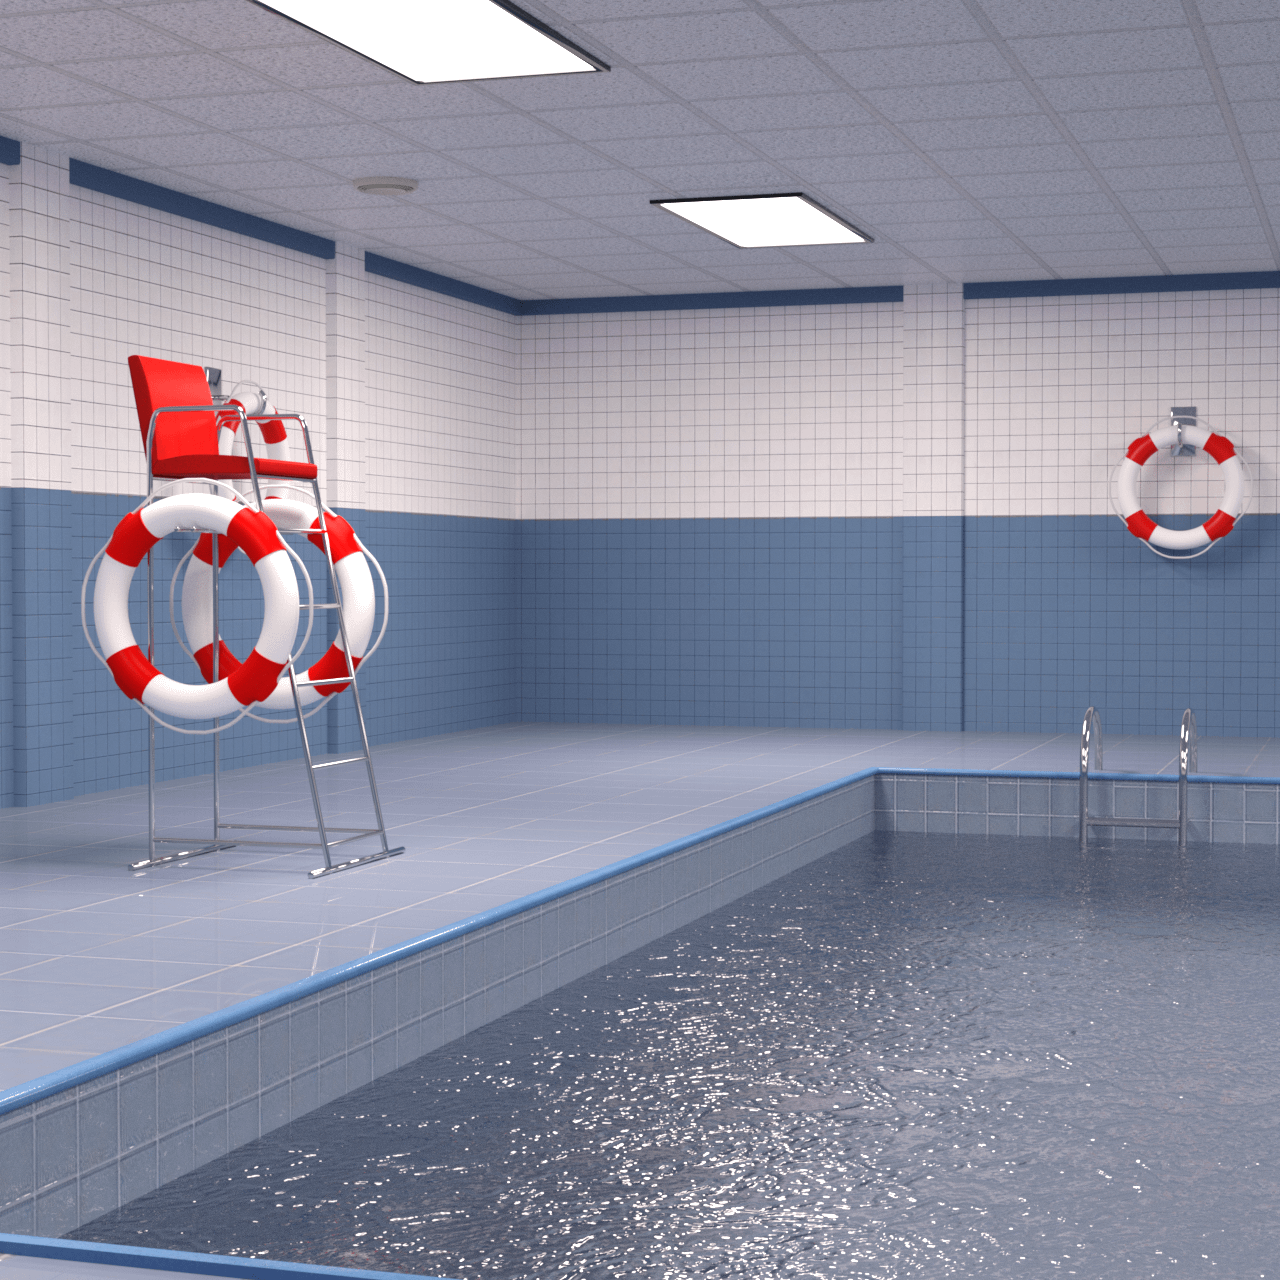 Rendering of an indoor swimming pool 3d model and lifebelt